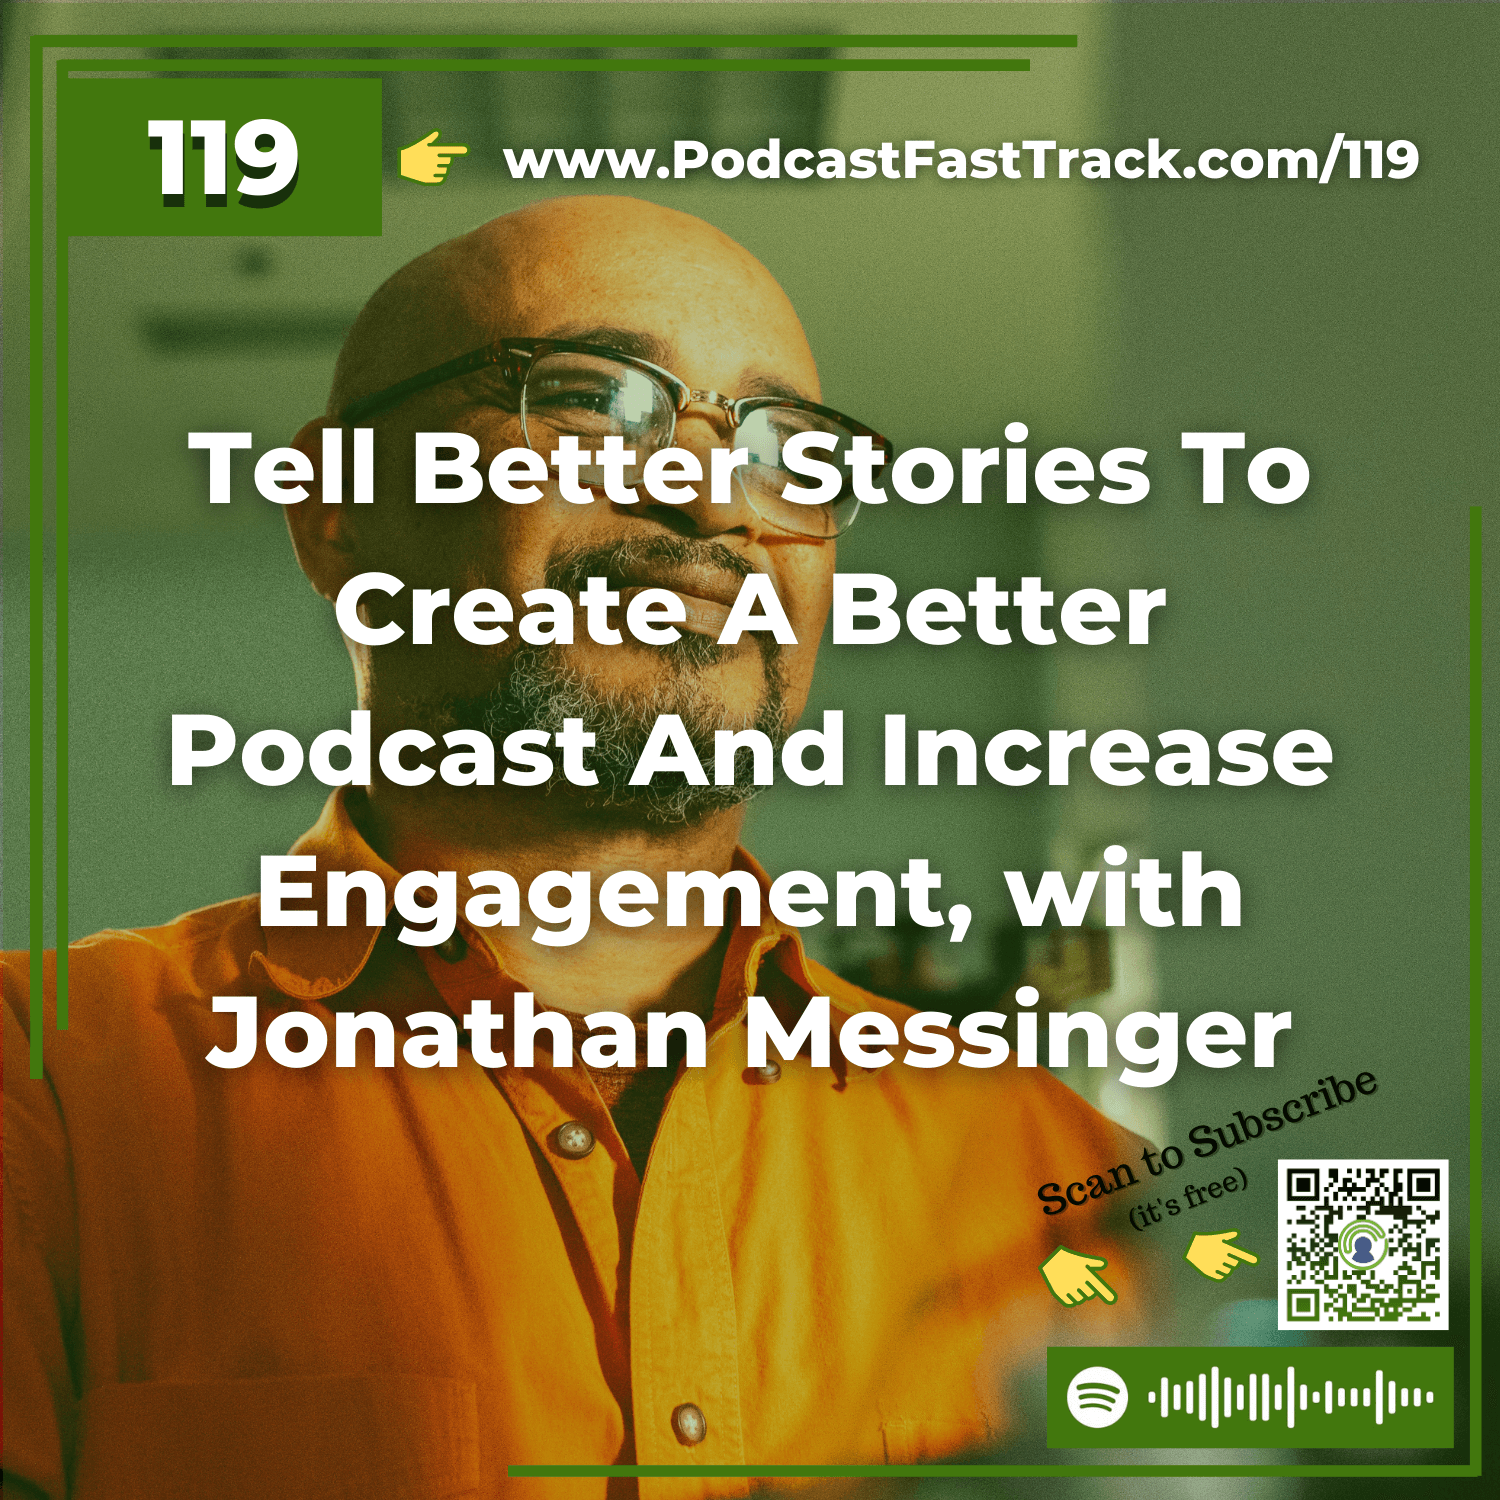 119: Tell Better Stories To Create A Better Podcast And Increase Engagement, with Jonathan Messinger